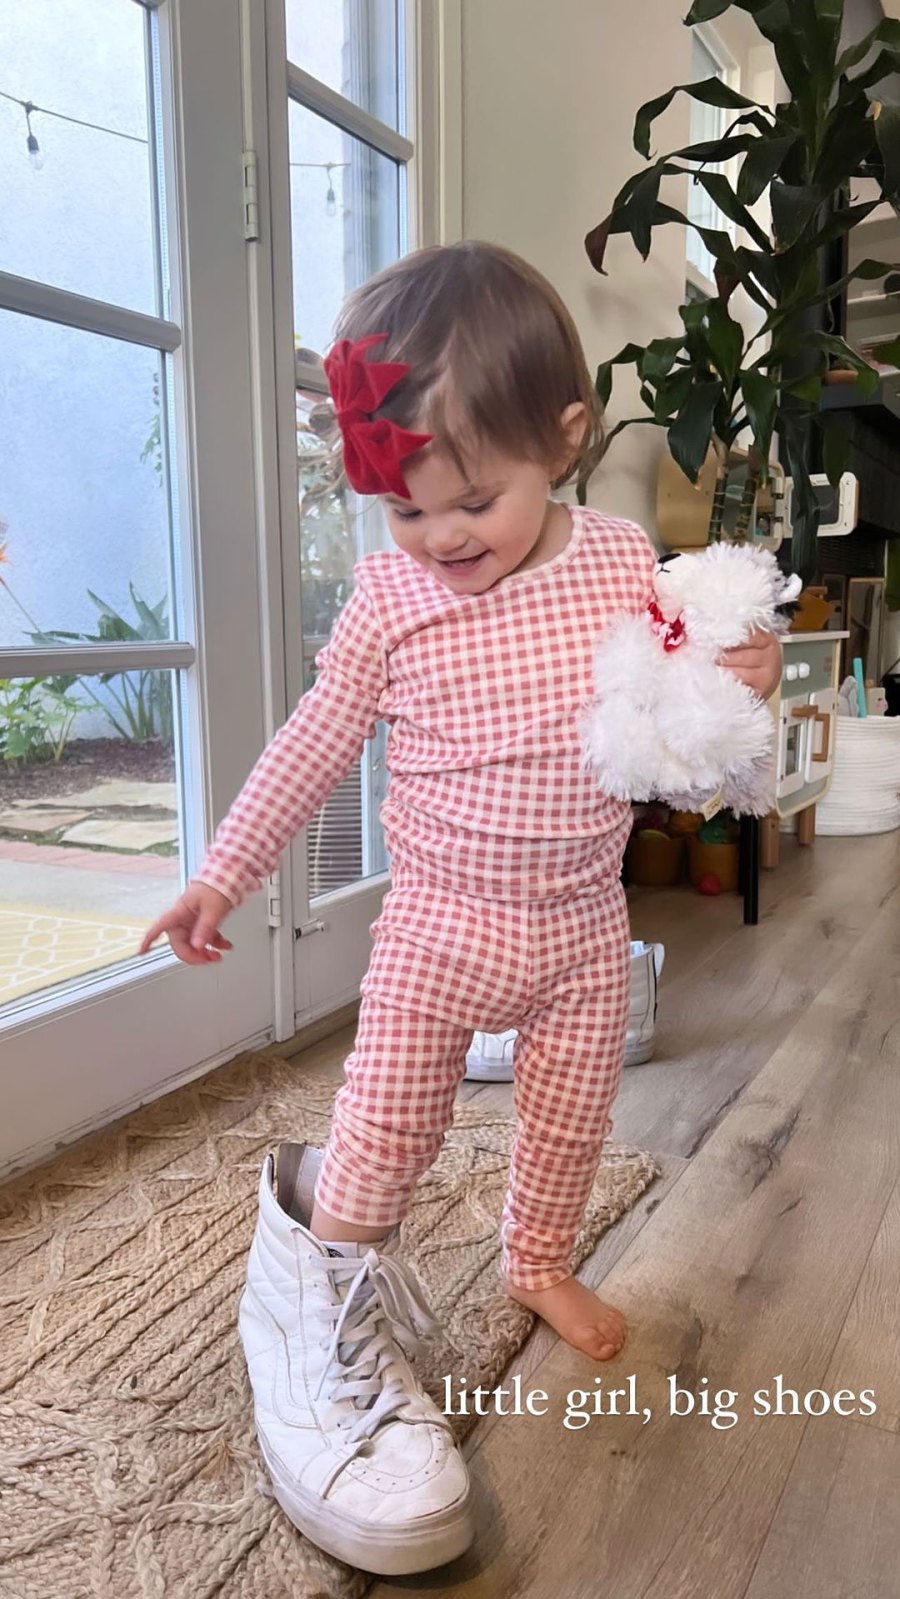 Tenley Molzhan Celebrity Kids Celebrating Valentines Day 2022 in Festive Outfits